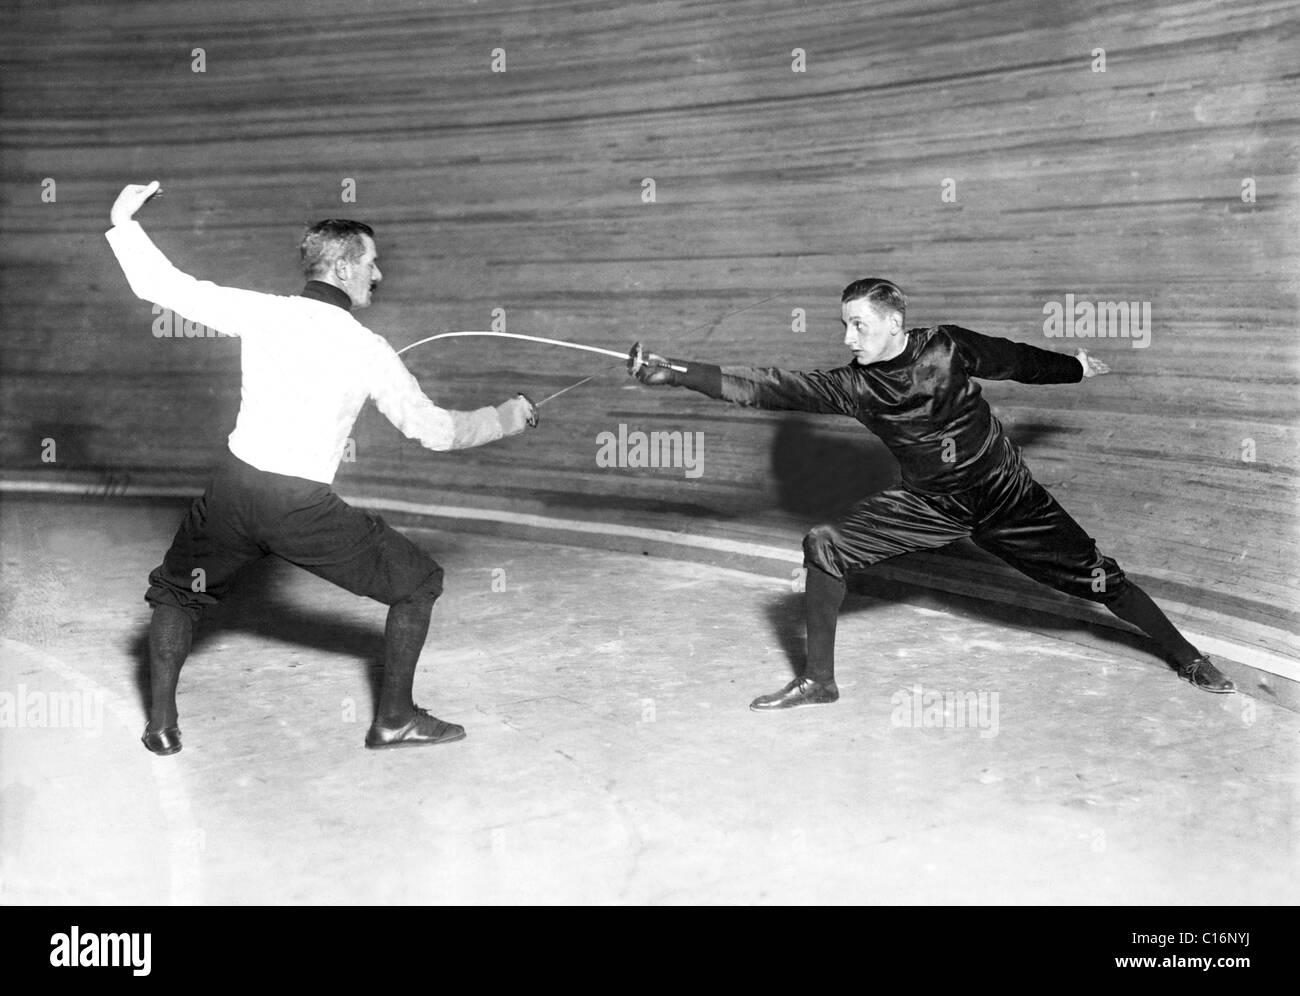 Historic photograph, fencing, probably from the thirties Stock Photo